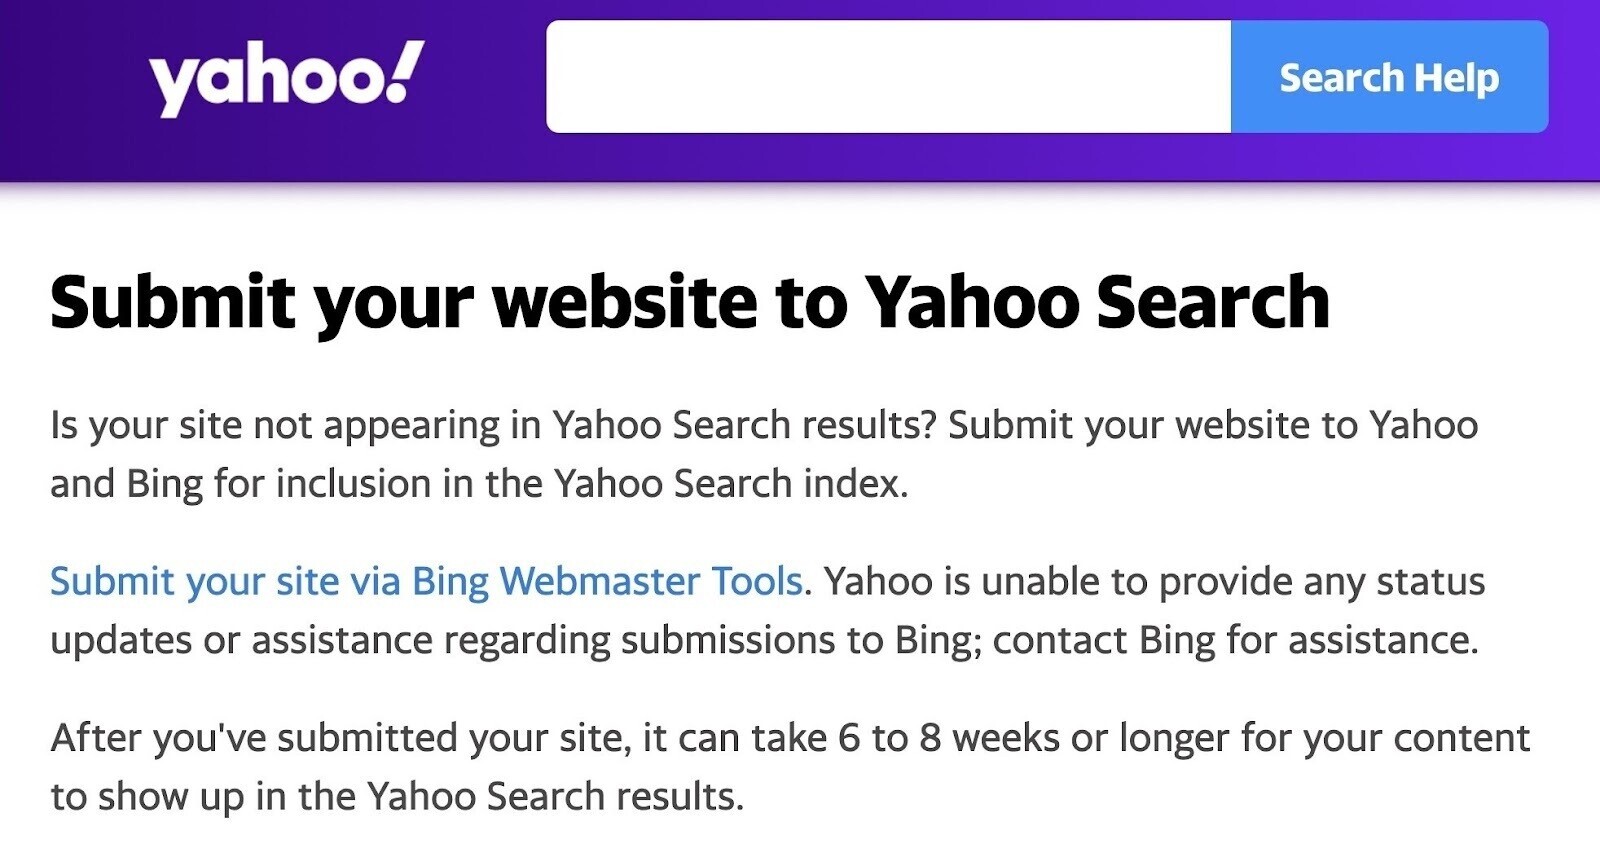 "Submit your website to Yahoo Search" page redirects you to the Bing Webmaster Tools.